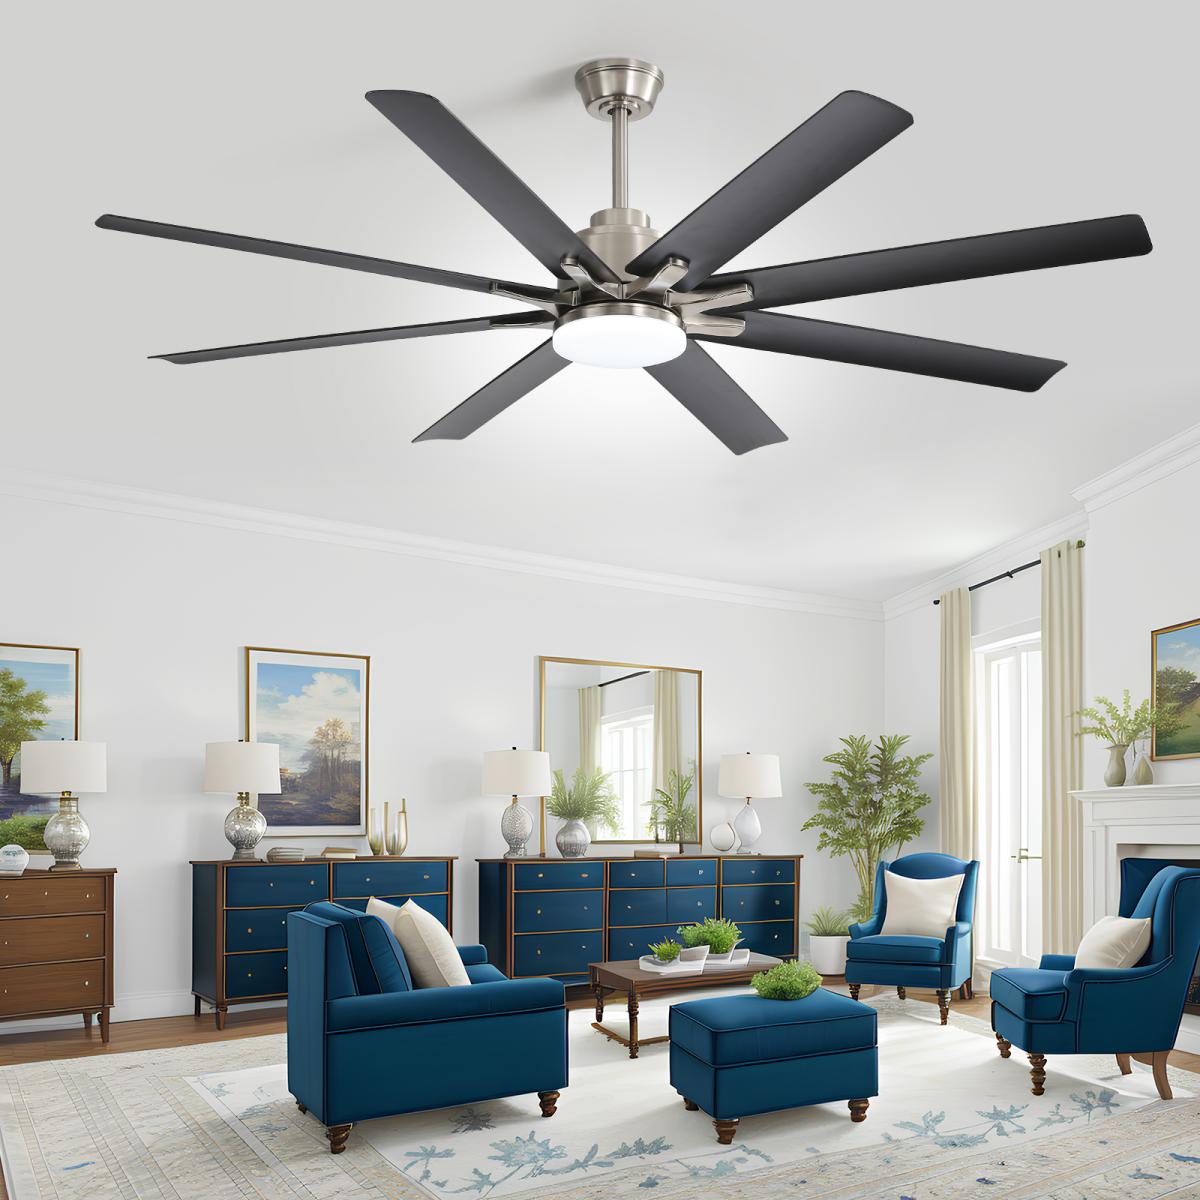 66 Inch Low Profile Abs Ceiling Fan with Dimmable Lights and Smart Remote Control 6 Speed Reversible Noiseless Dc Motor for Indoor